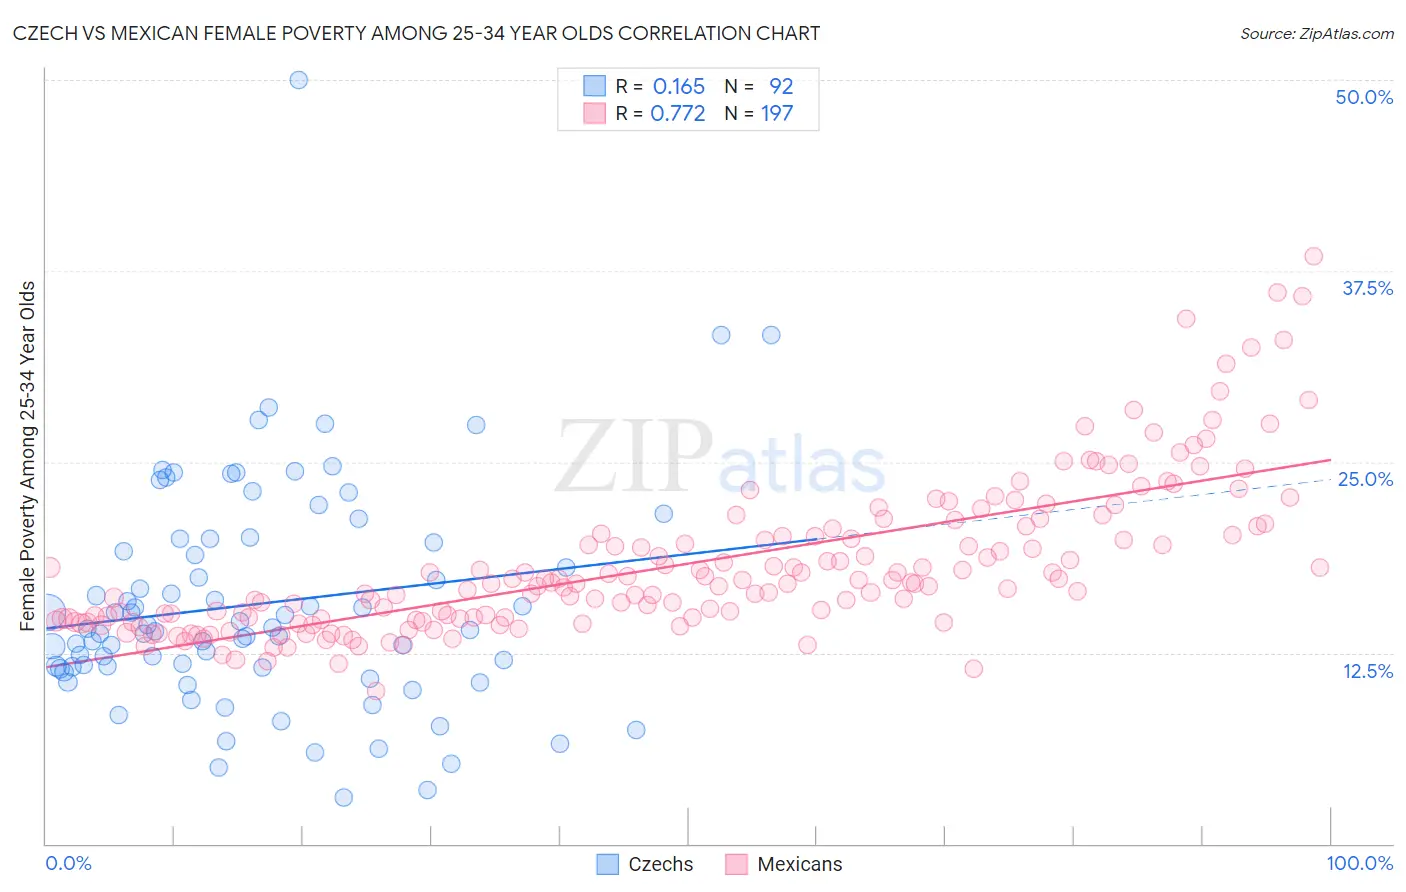 Czech vs Mexican Female Poverty Among 25-34 Year Olds